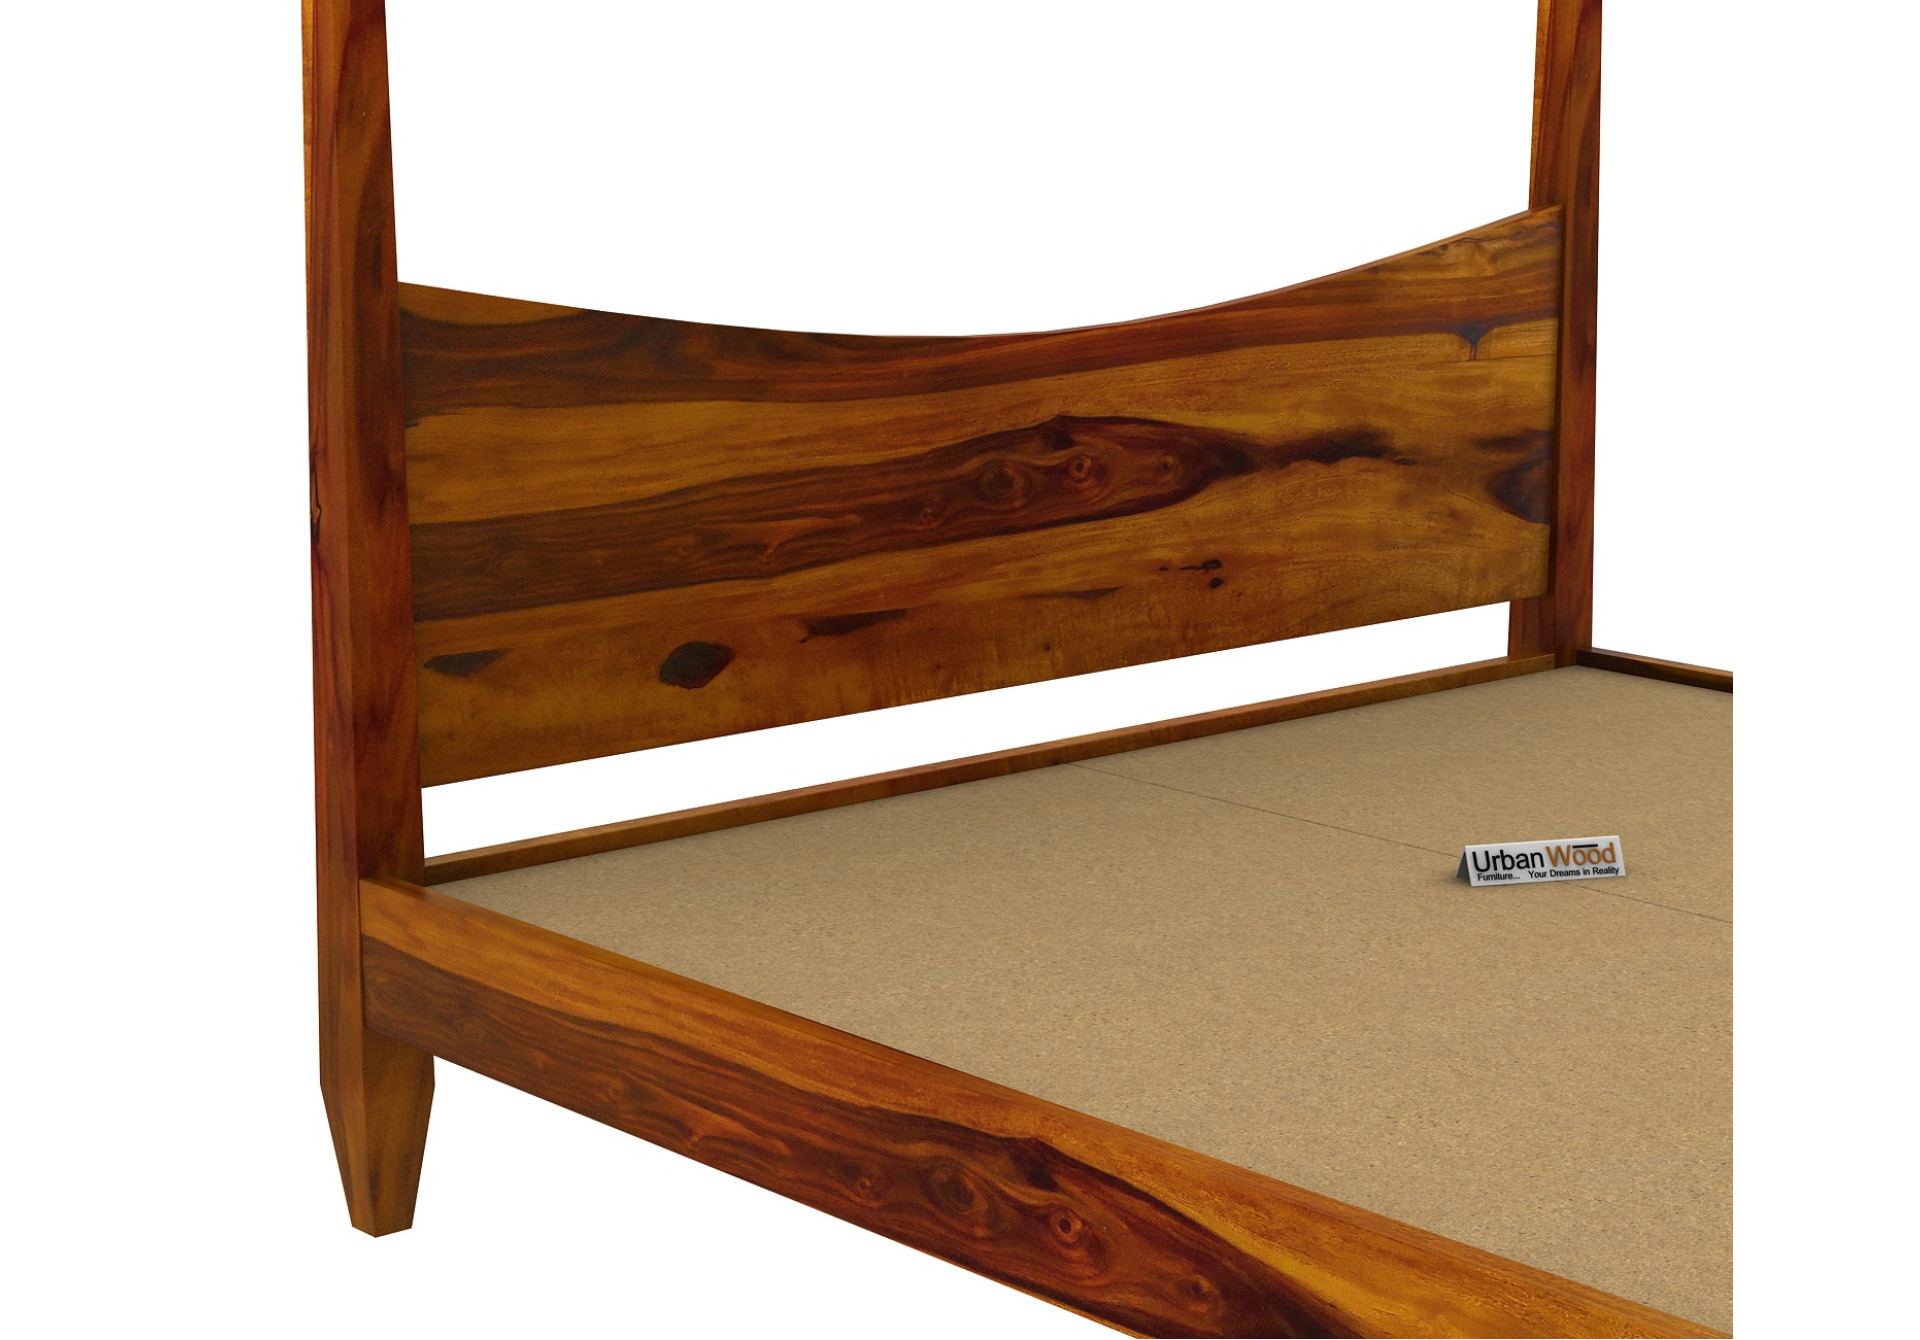 Flora Poster Bed (King Size, Honey Finish)